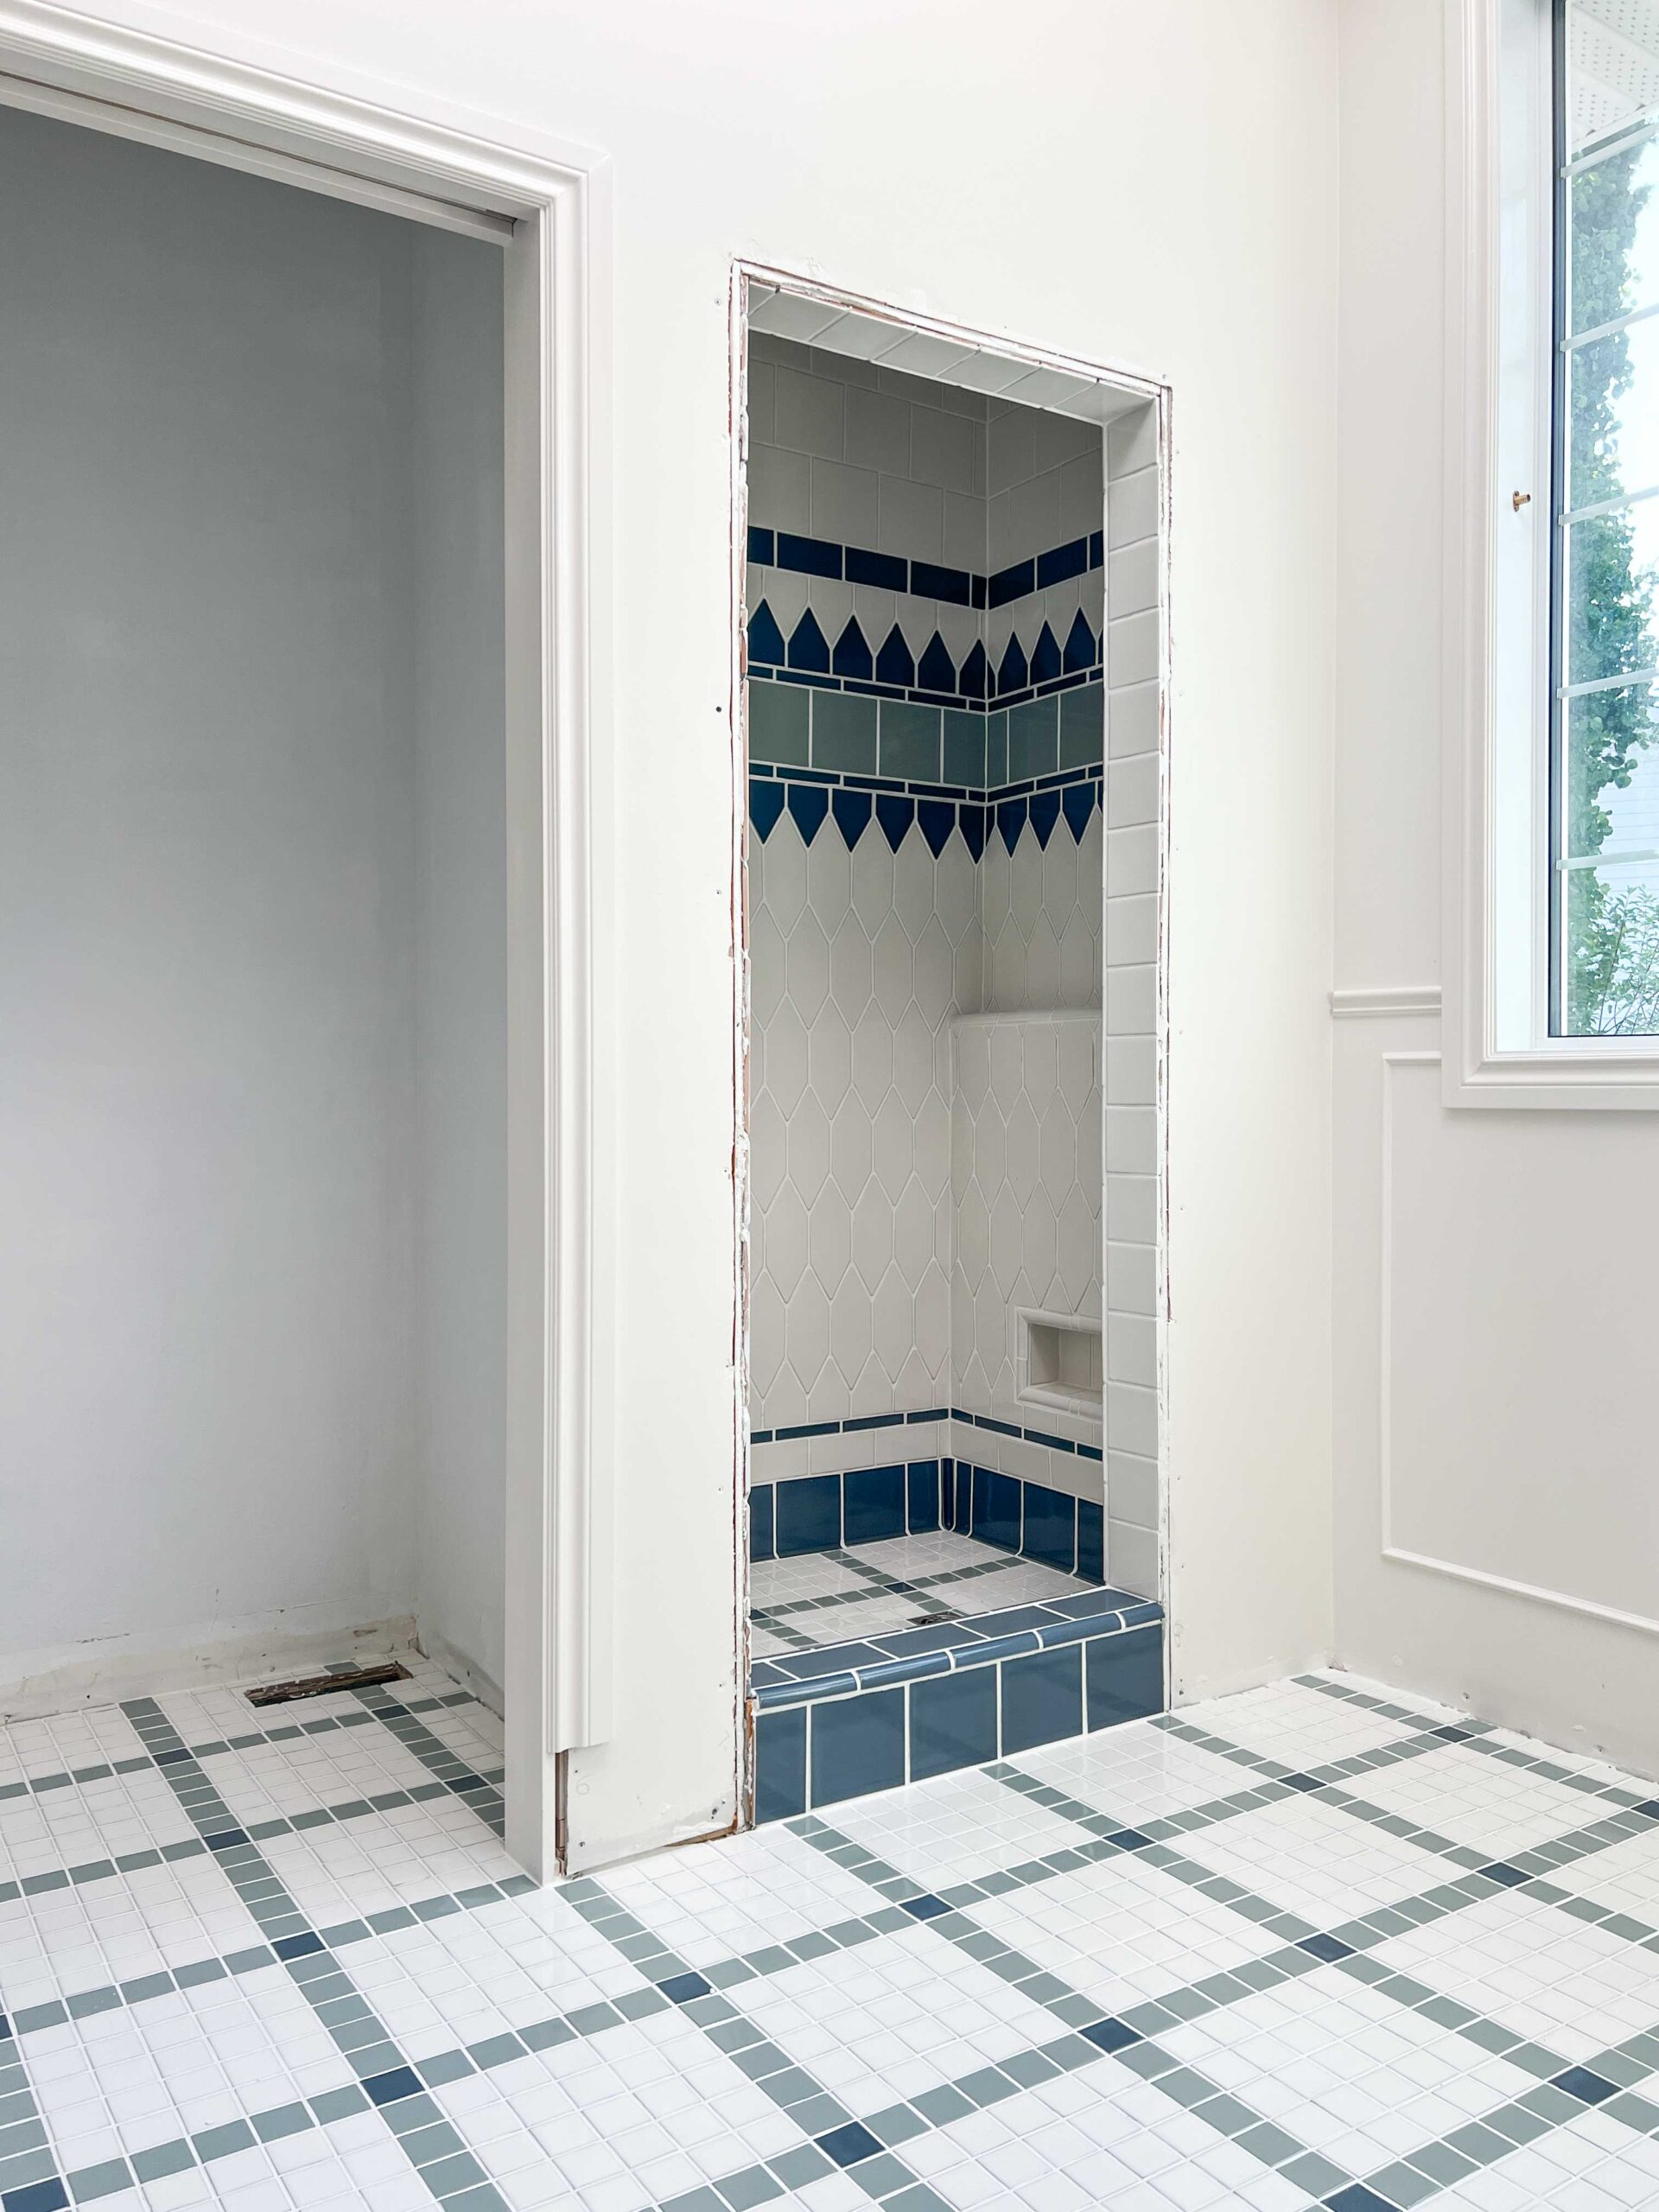 Historic tile pattern on floor and shower with fireclay tile